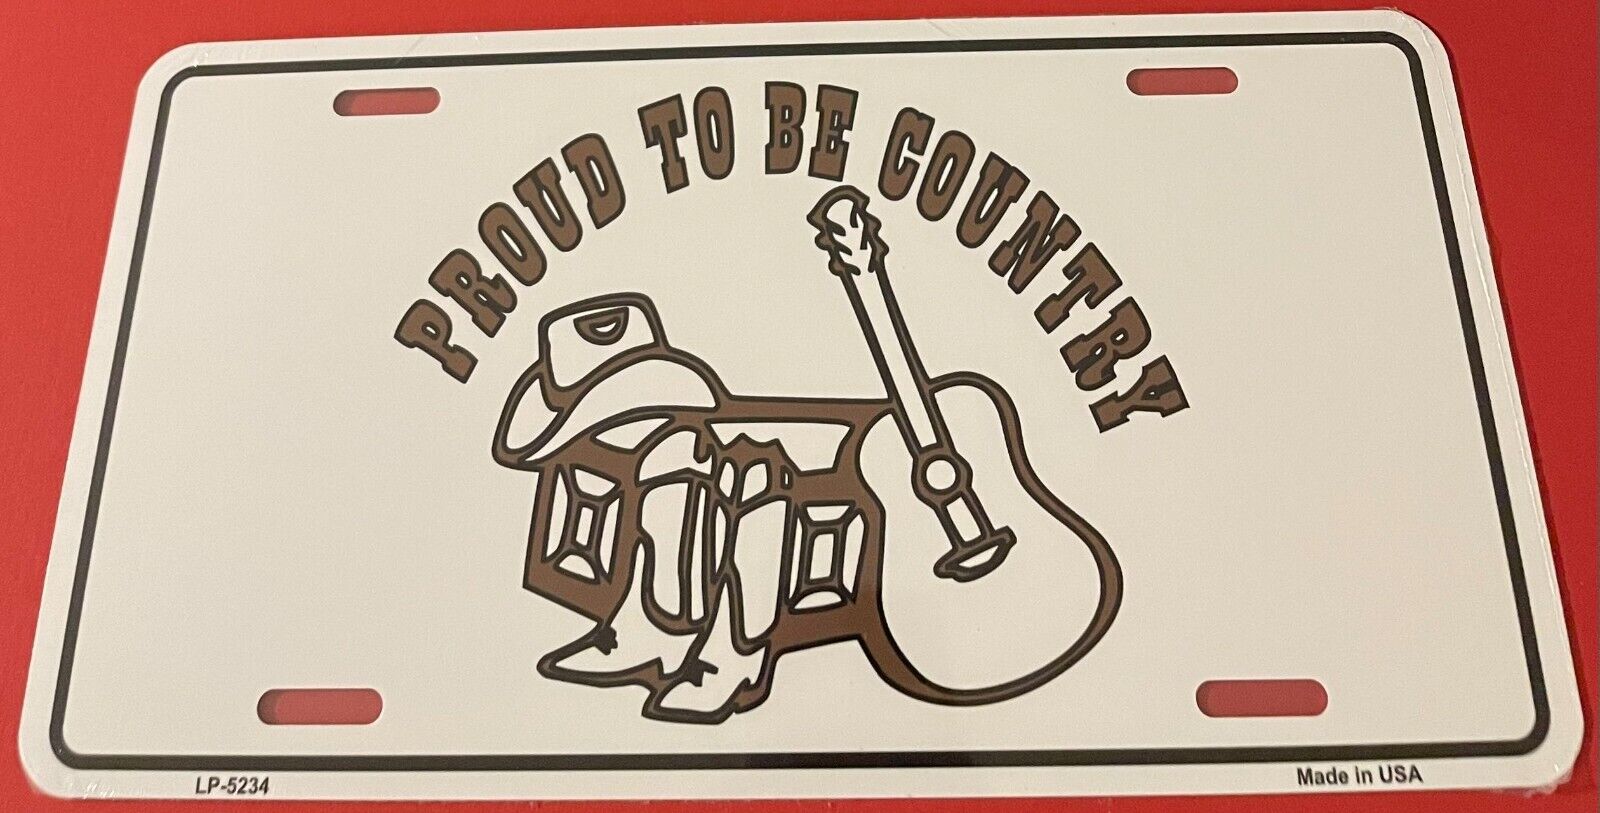 Proud To Be Country Booster License Plate Music Cowboy Boots Hate Guitar Nashvil